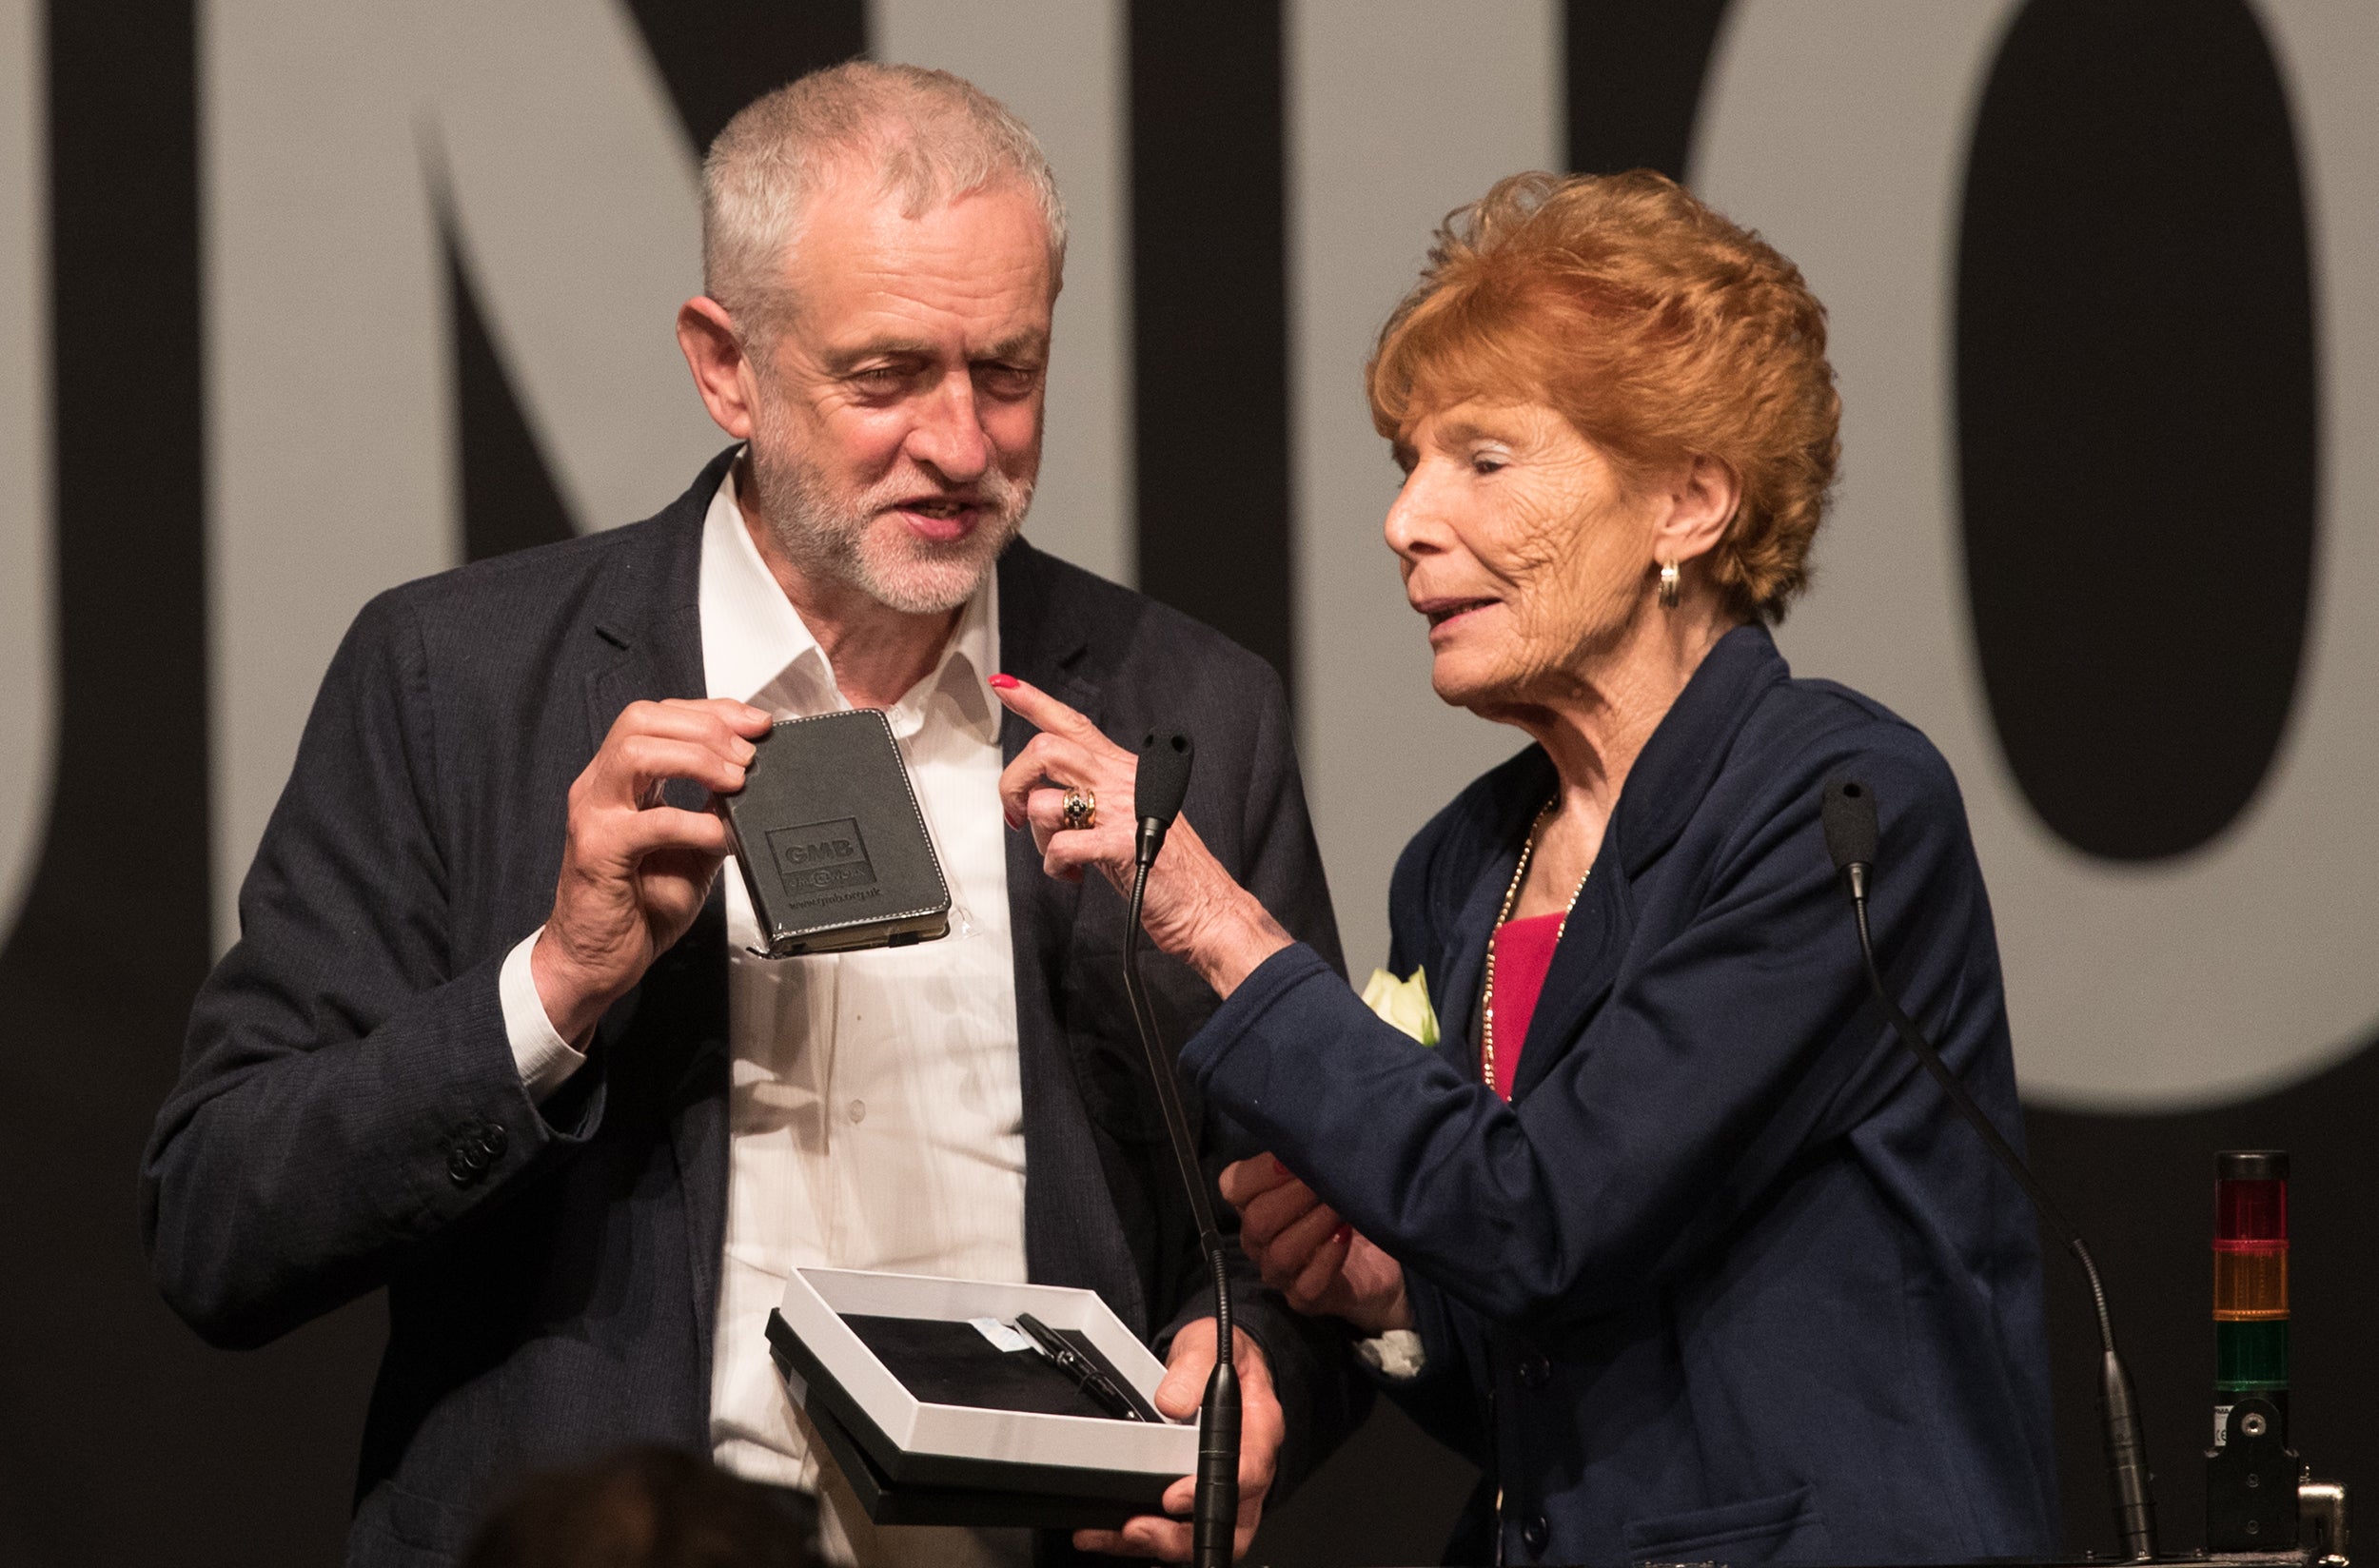 Turner with Labour leader Jeremy Corbyn at the GMB Congress in Bournemouth last year